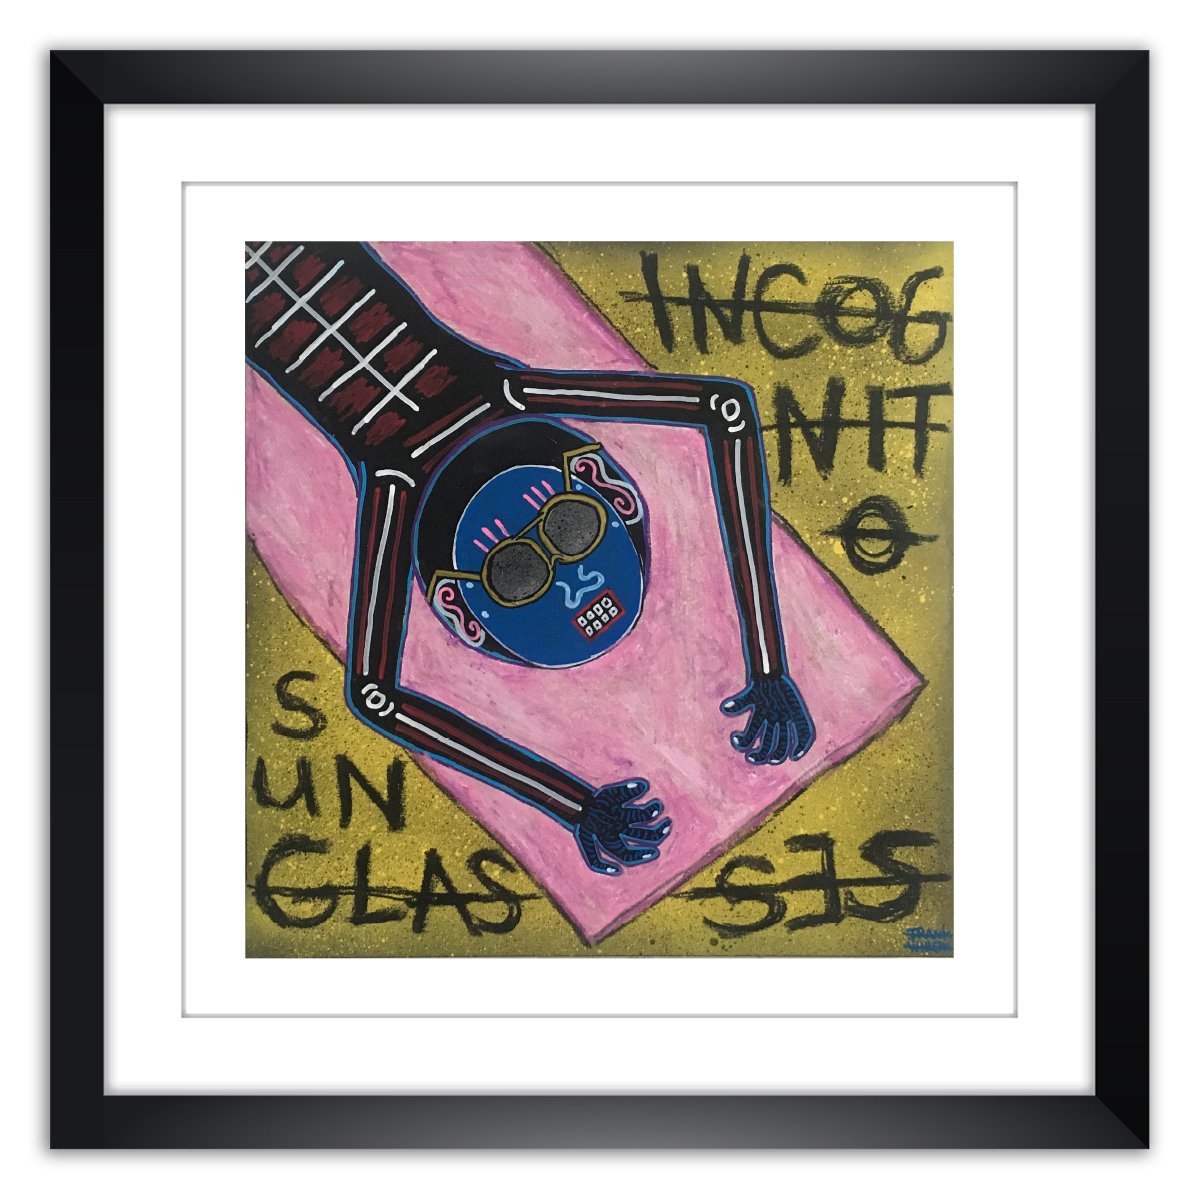 Limited prints - INCOGNITO SUNGLASSES framed - Frank Willems